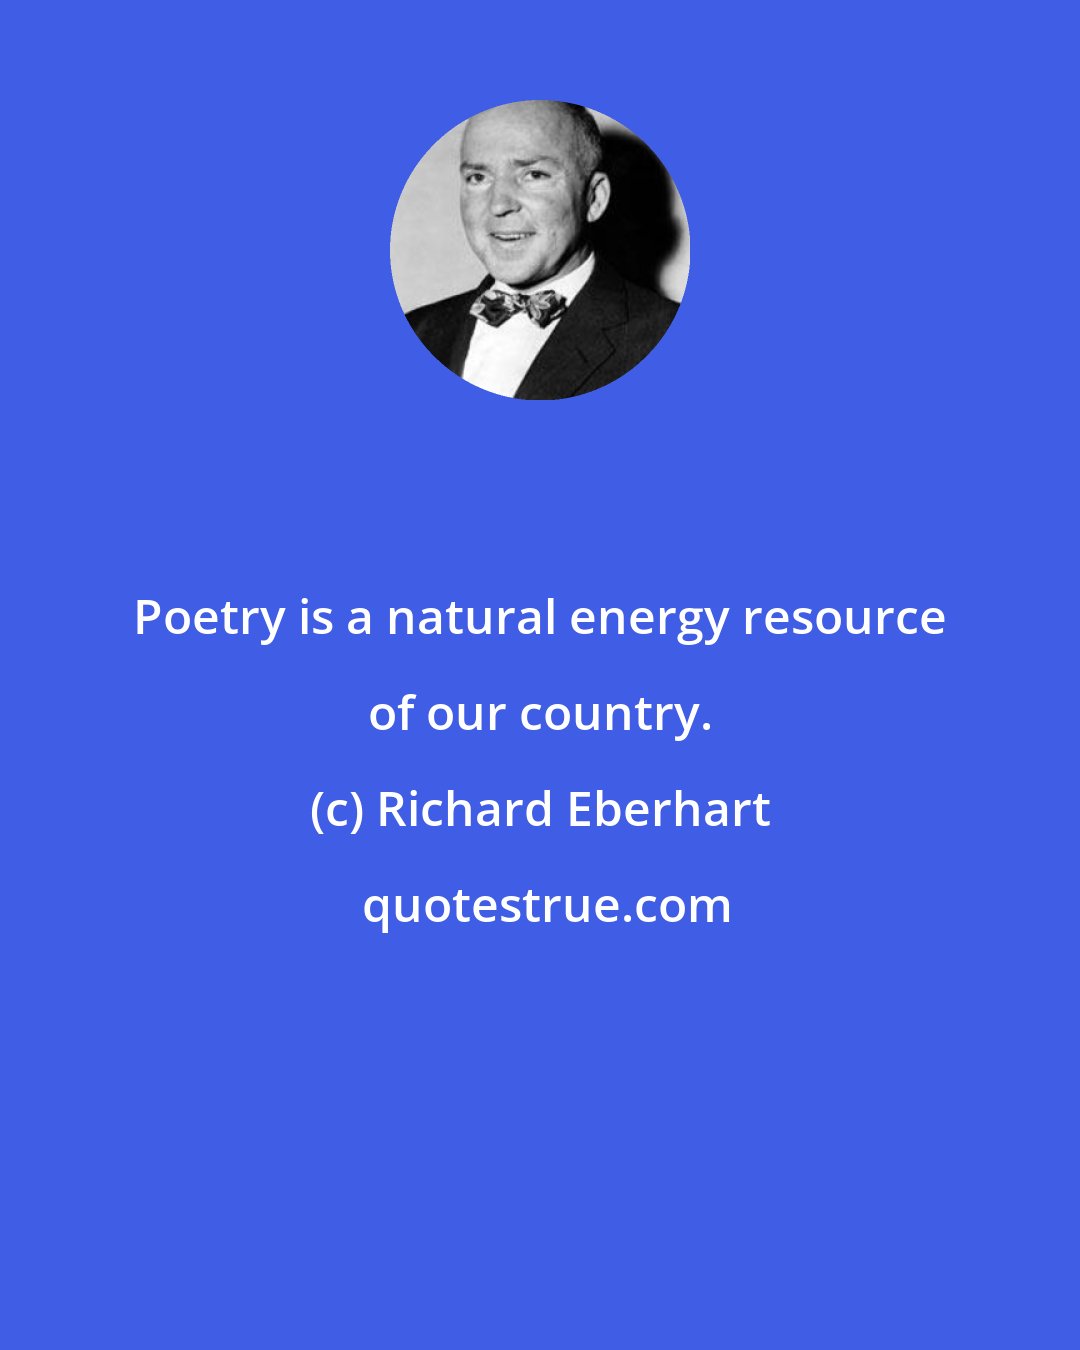 Richard Eberhart: Poetry is a natural energy resource of our country.